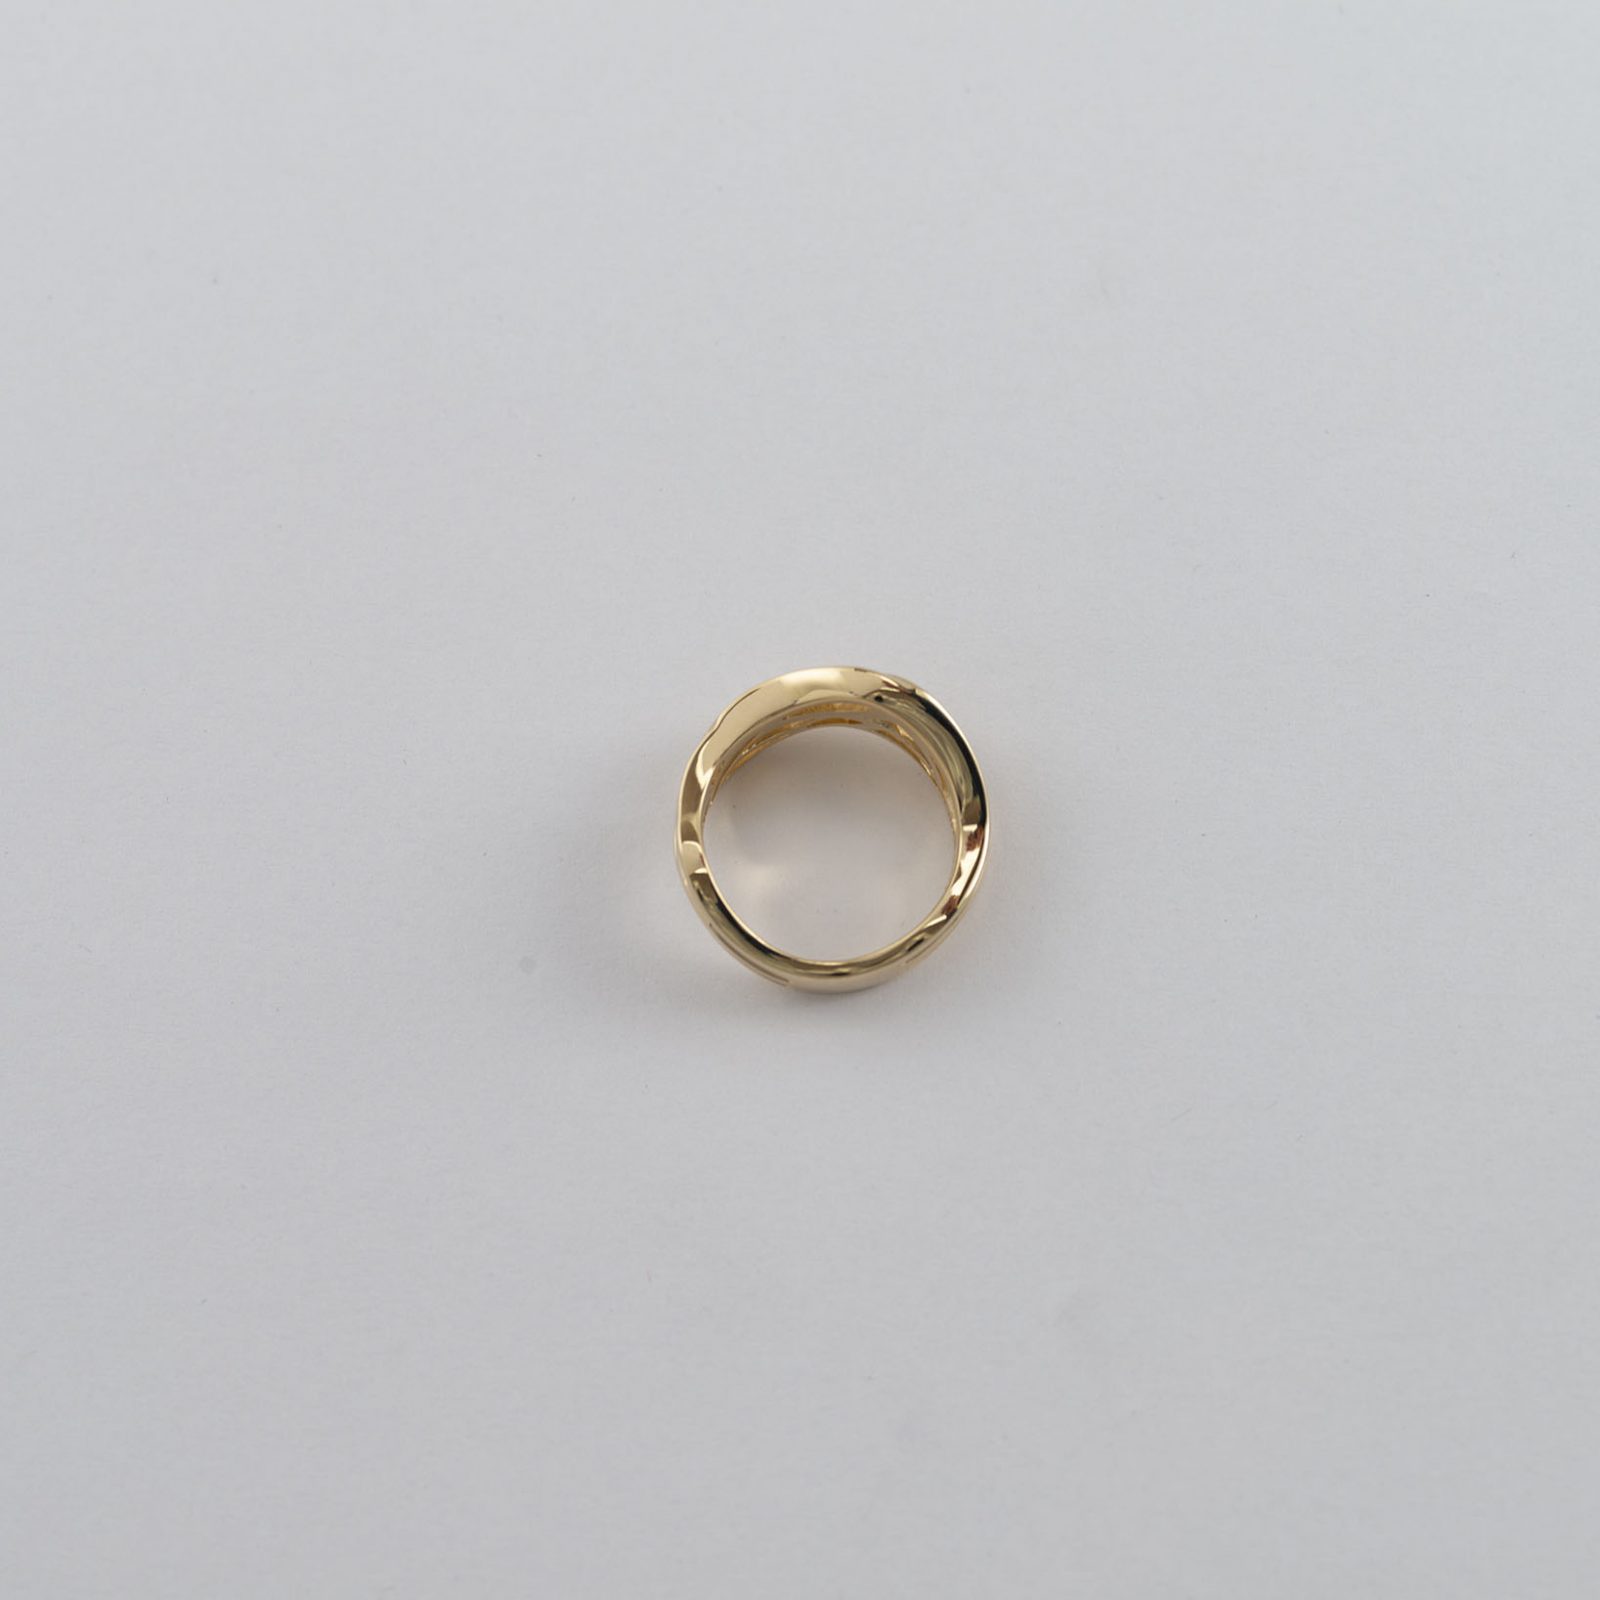 Gold snake river ring without diamonds. Shown in a size 6.75.